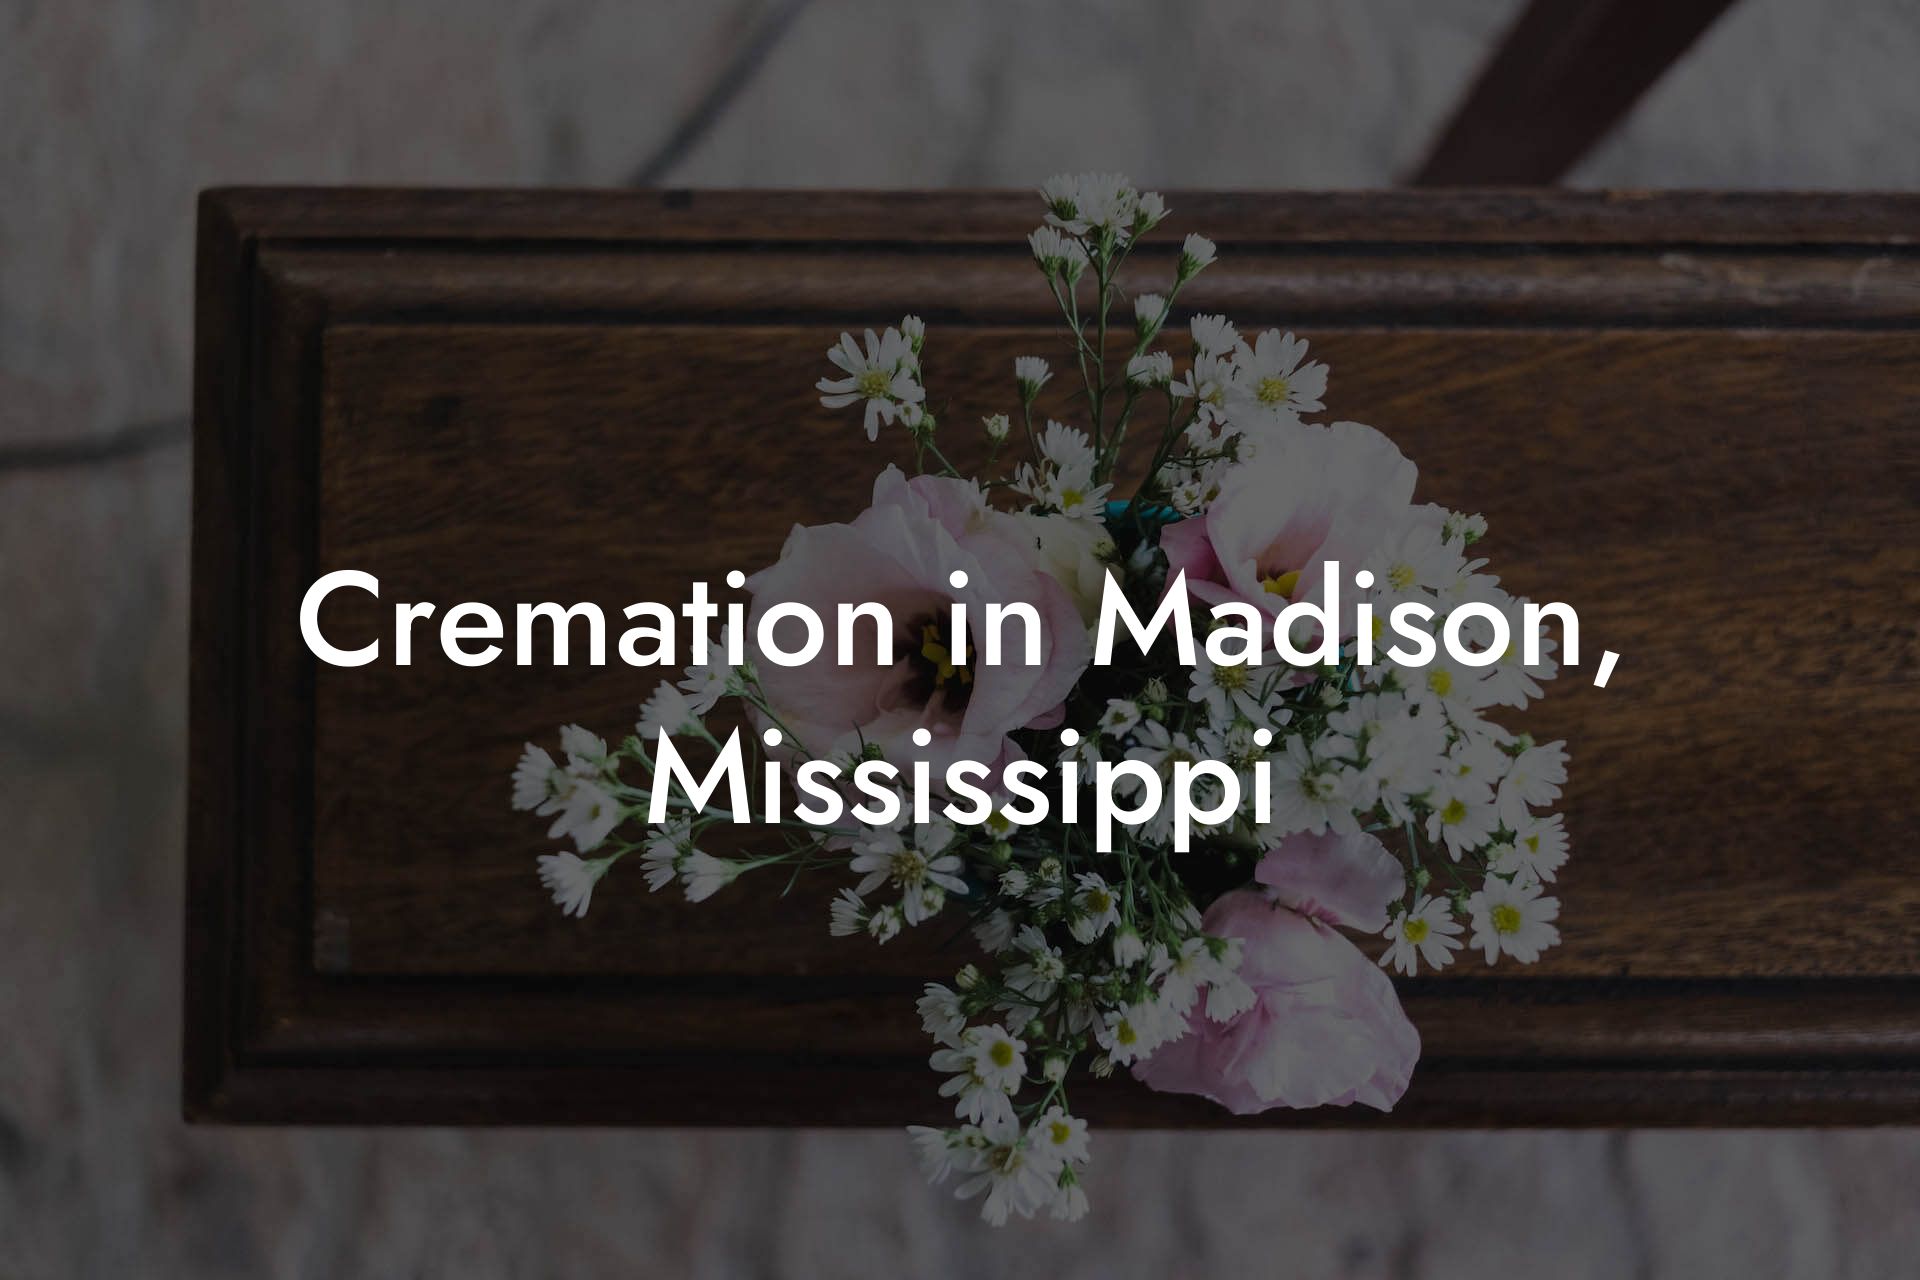 Cremation in Madison, Mississippi